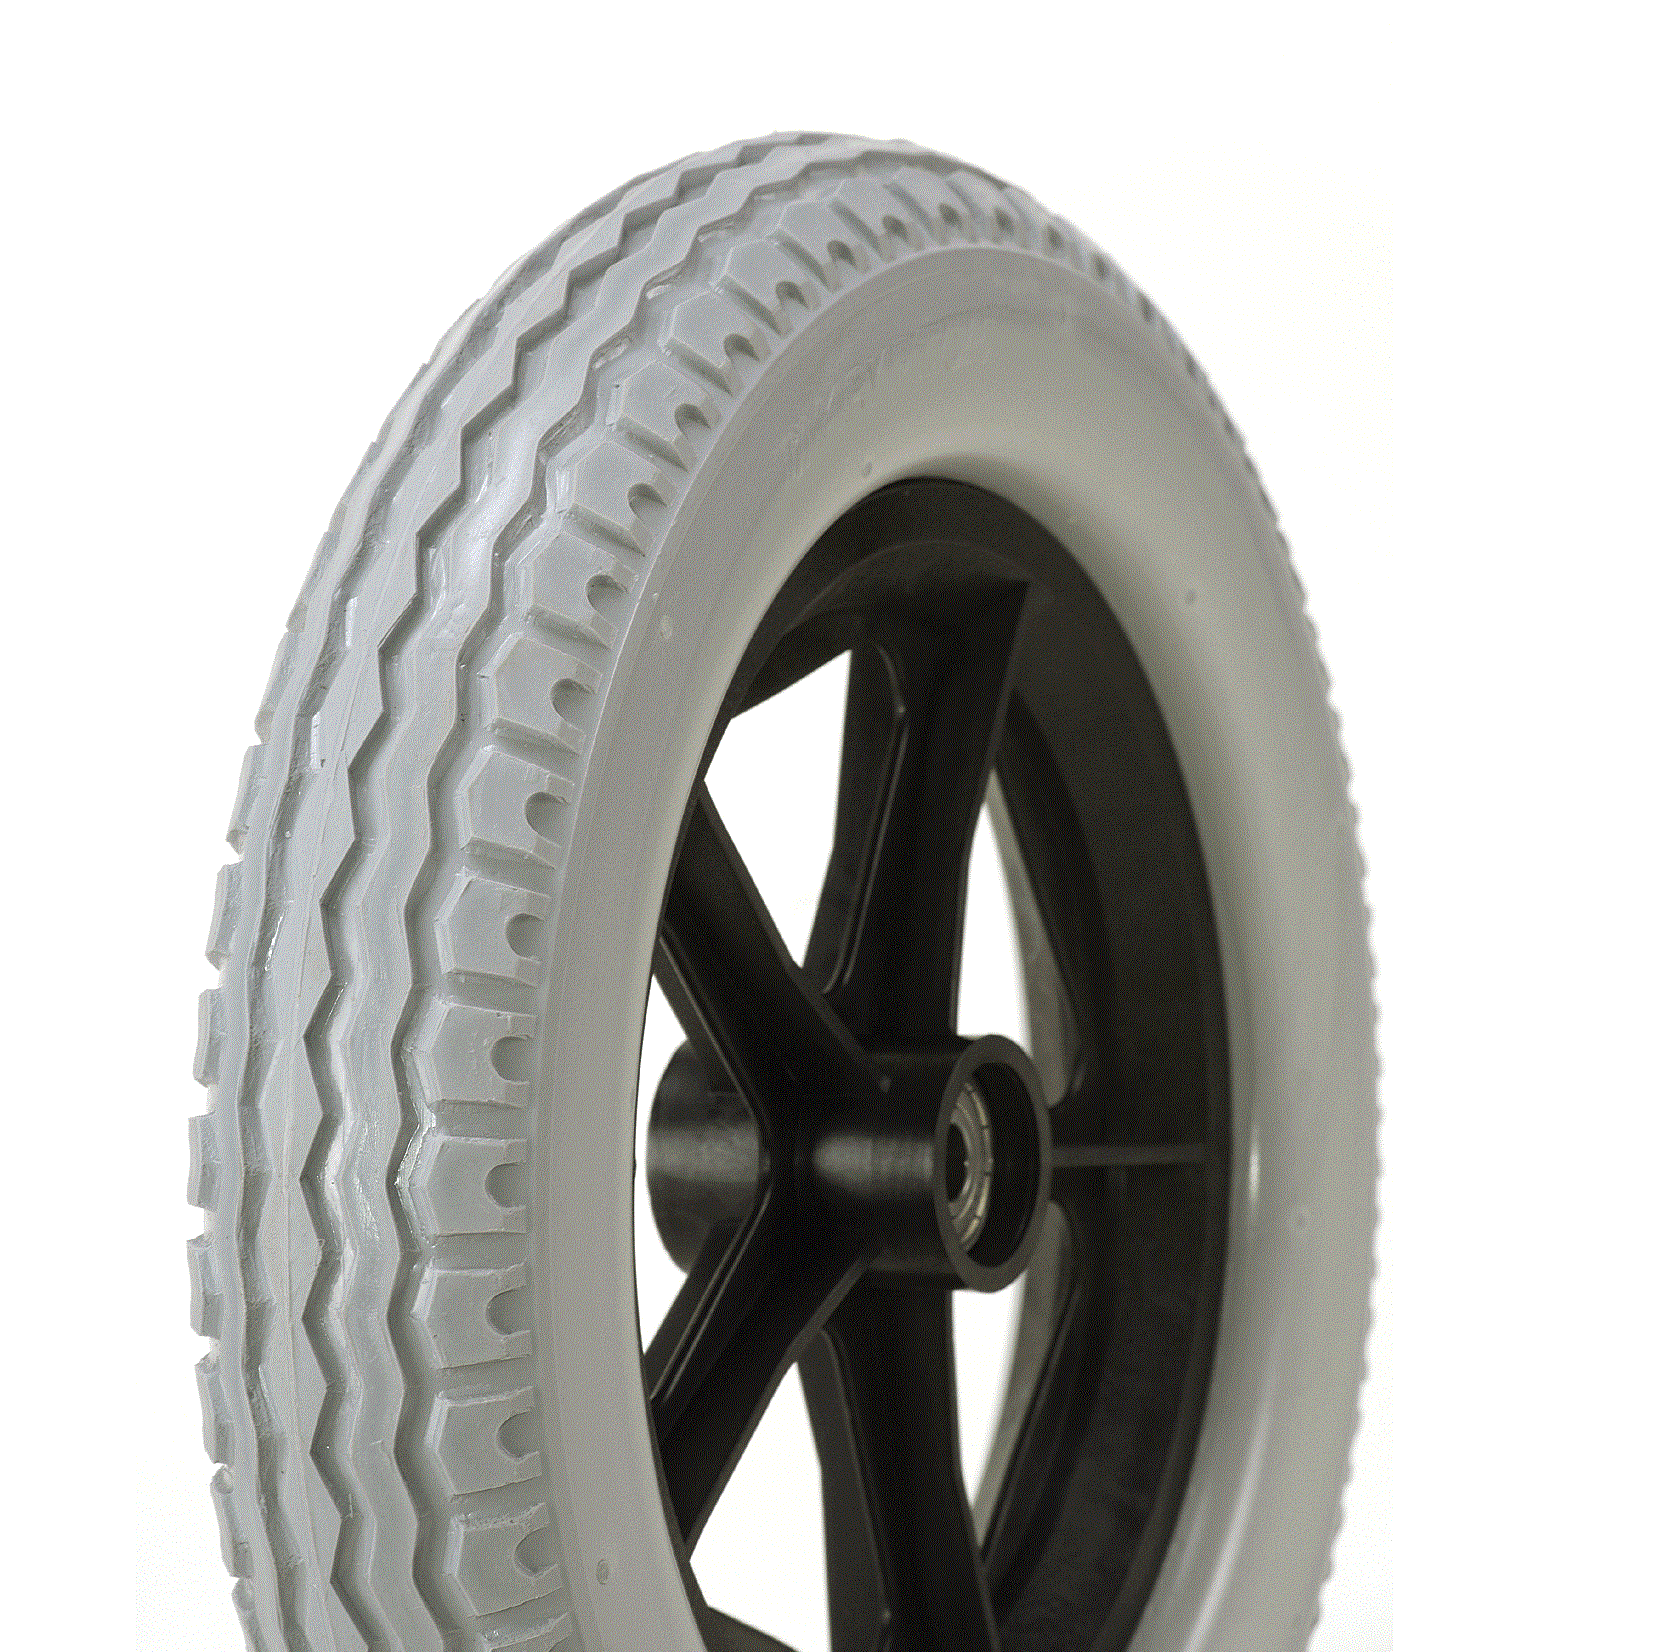 WCC950 – Wheel 12-1/2 X 2-1/4 With PU Solid Tyre – Rex Imports